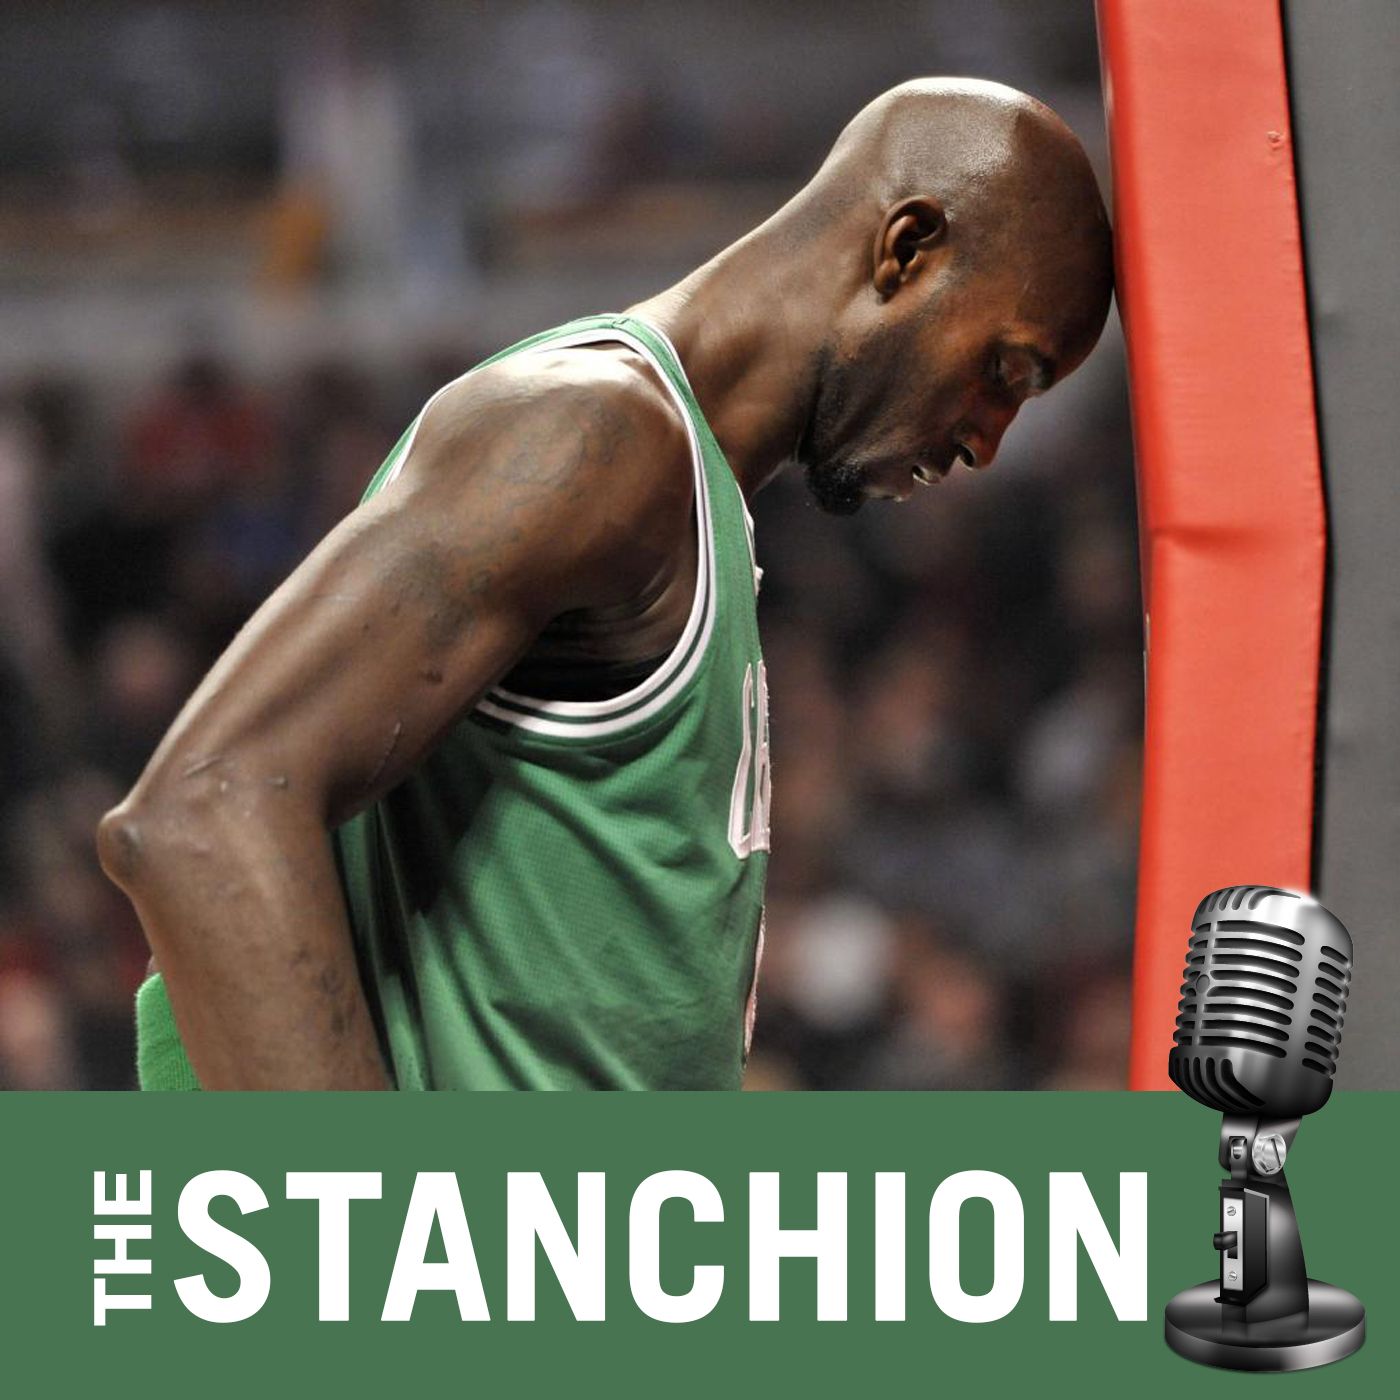 The Stanchion